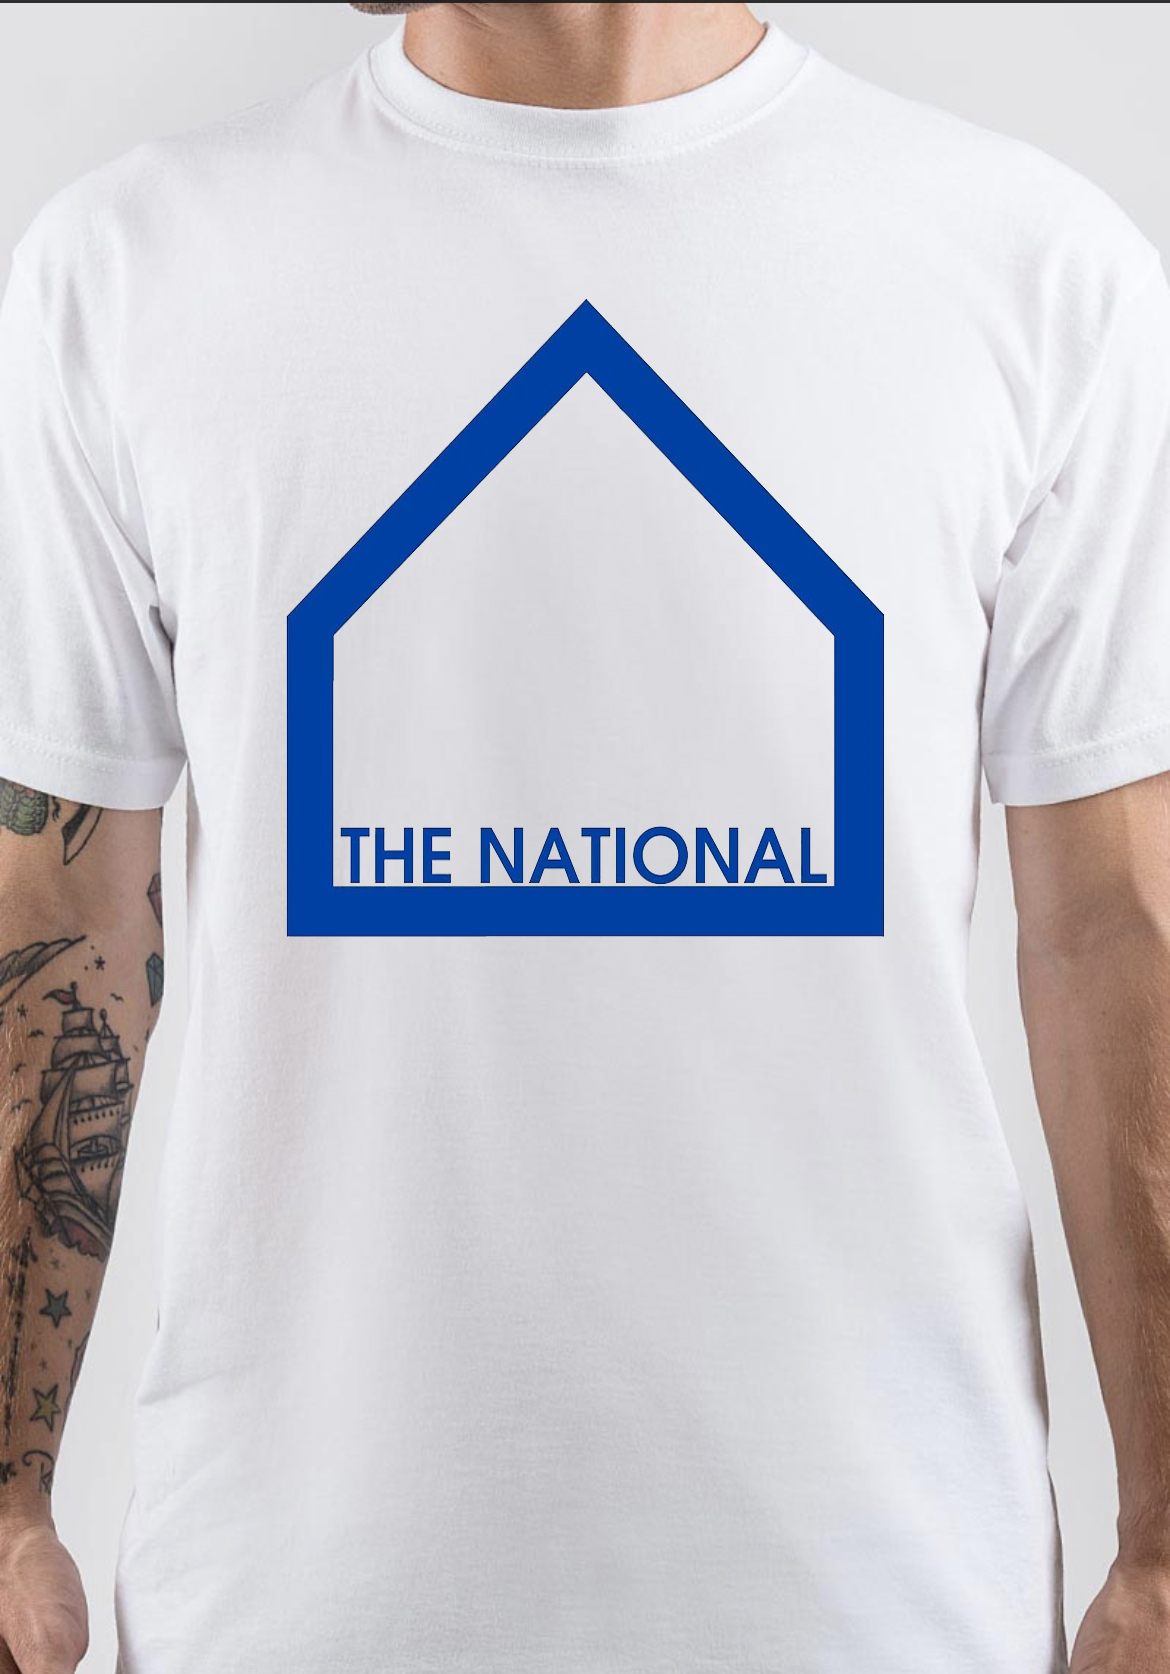 The National T-Shirt And Merchandise